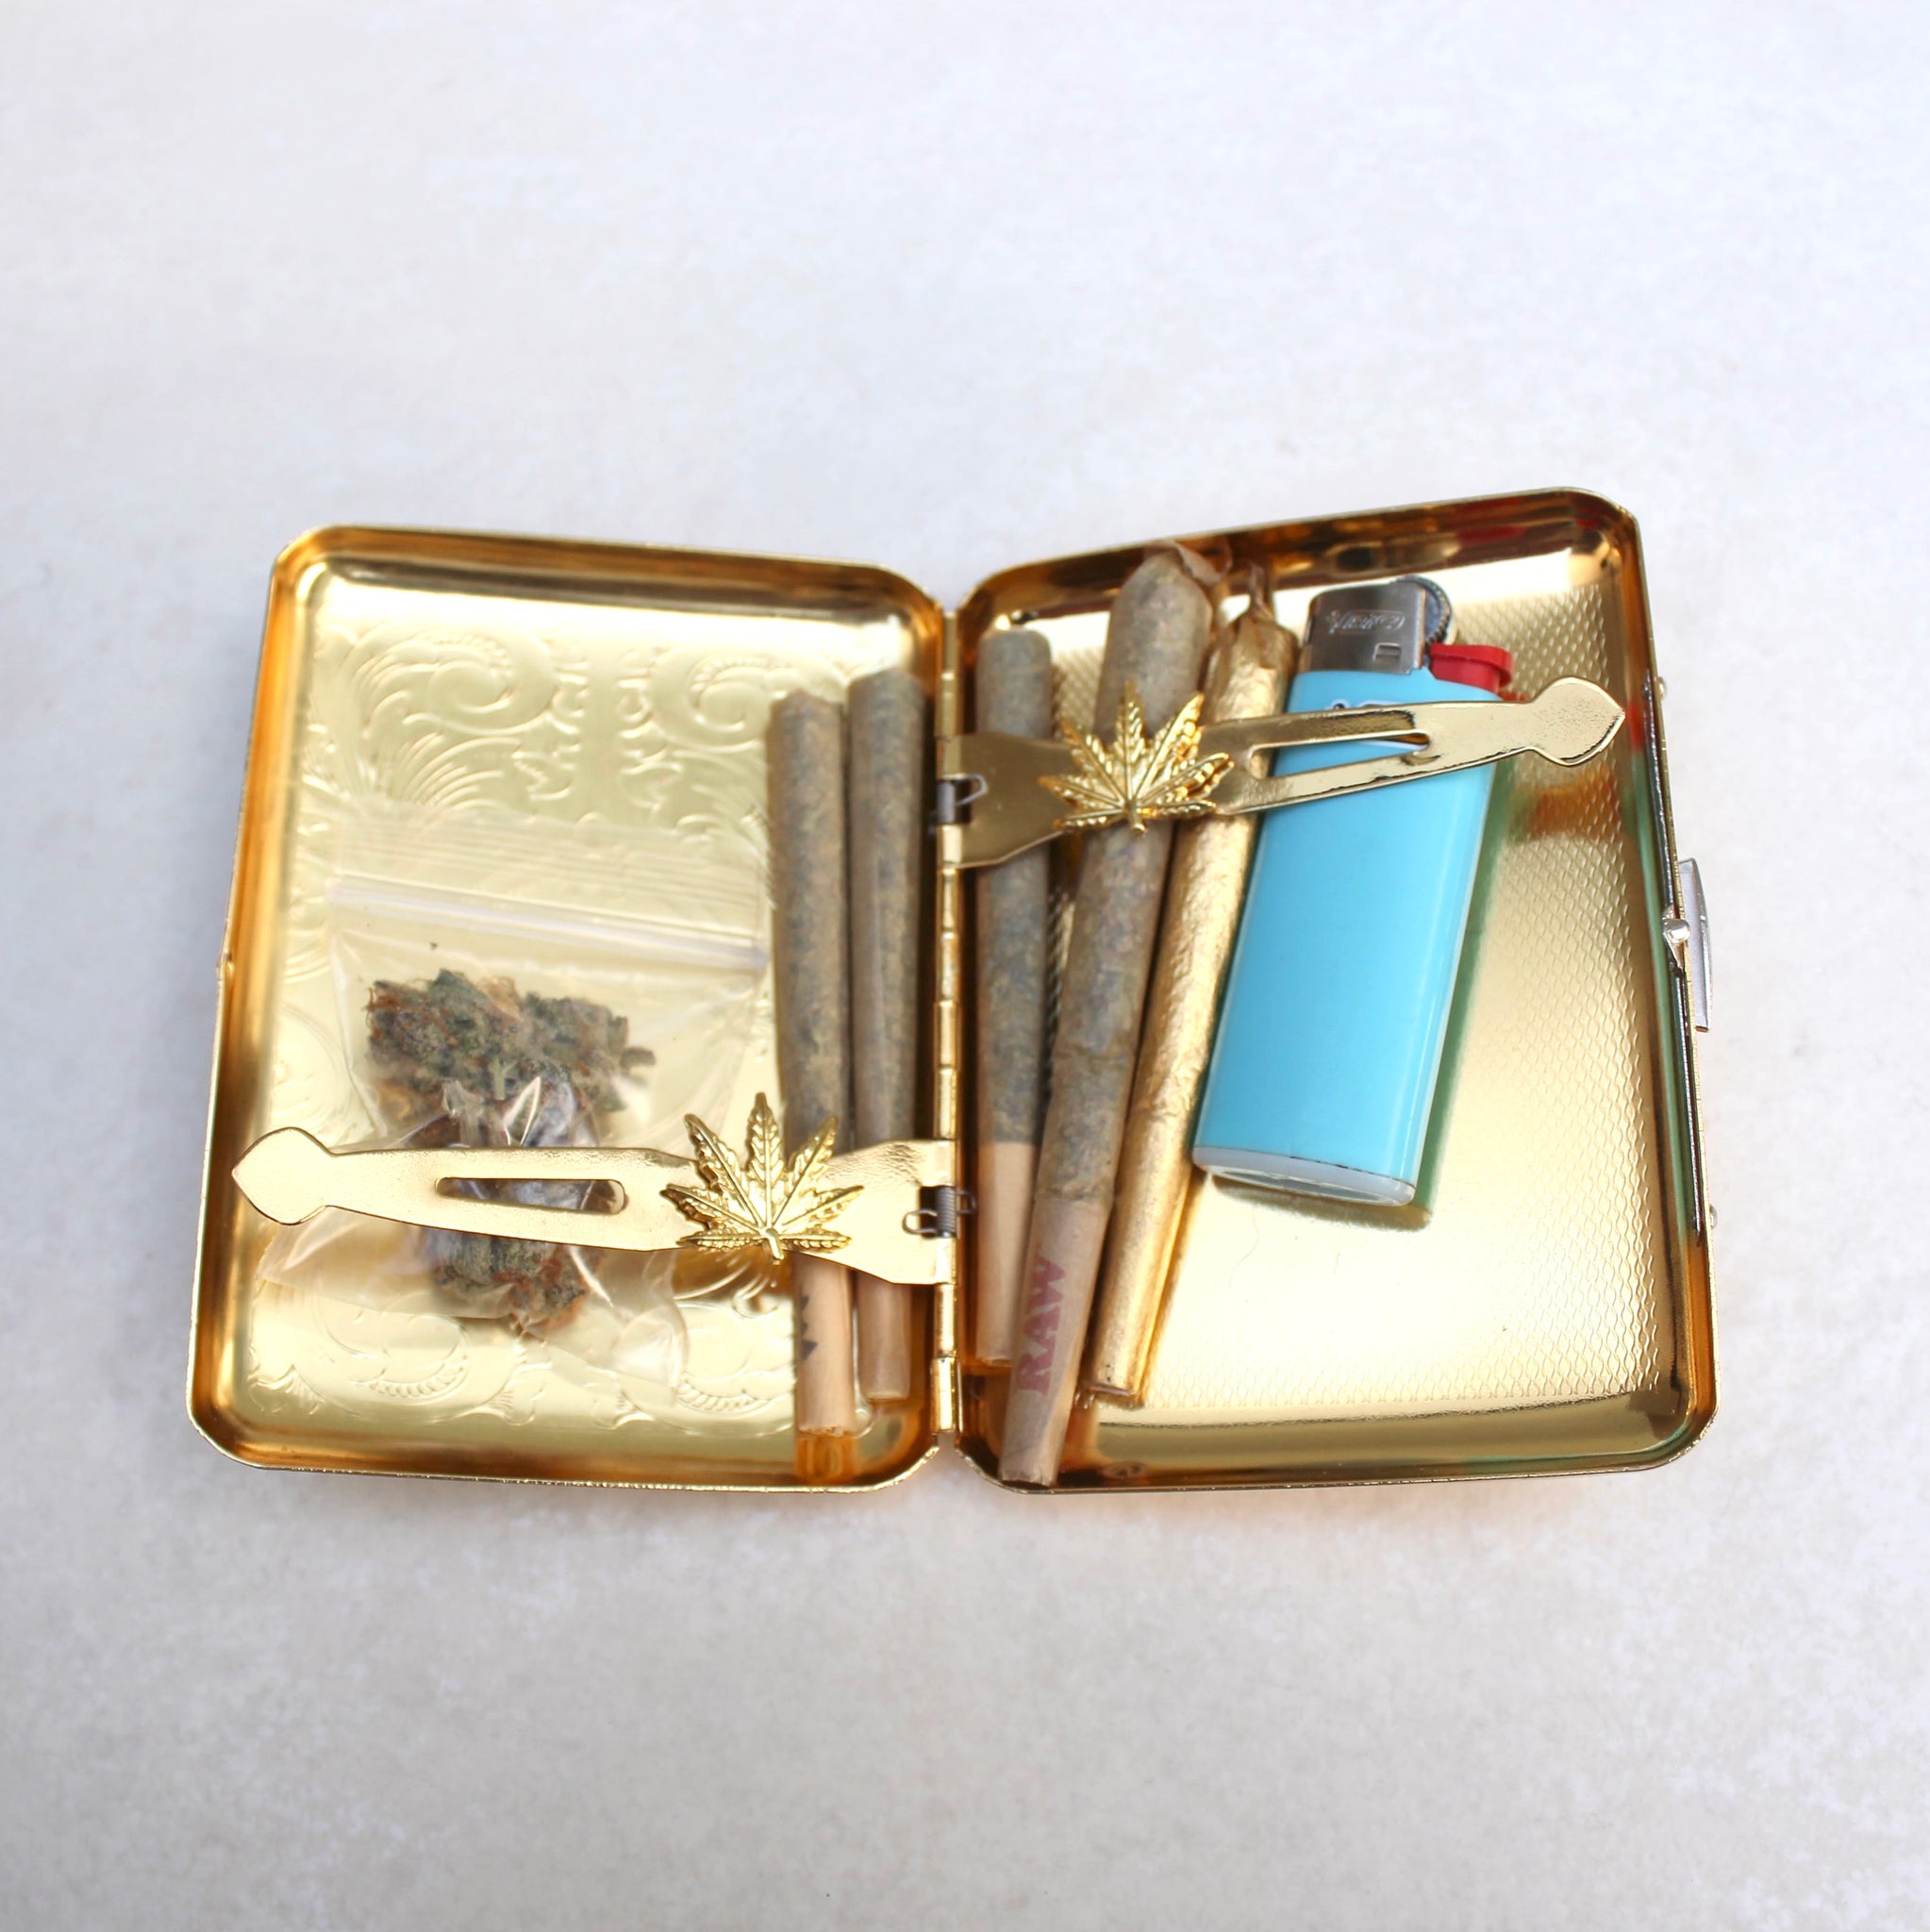 Ornate Gold Embellished Joint Carrying Case